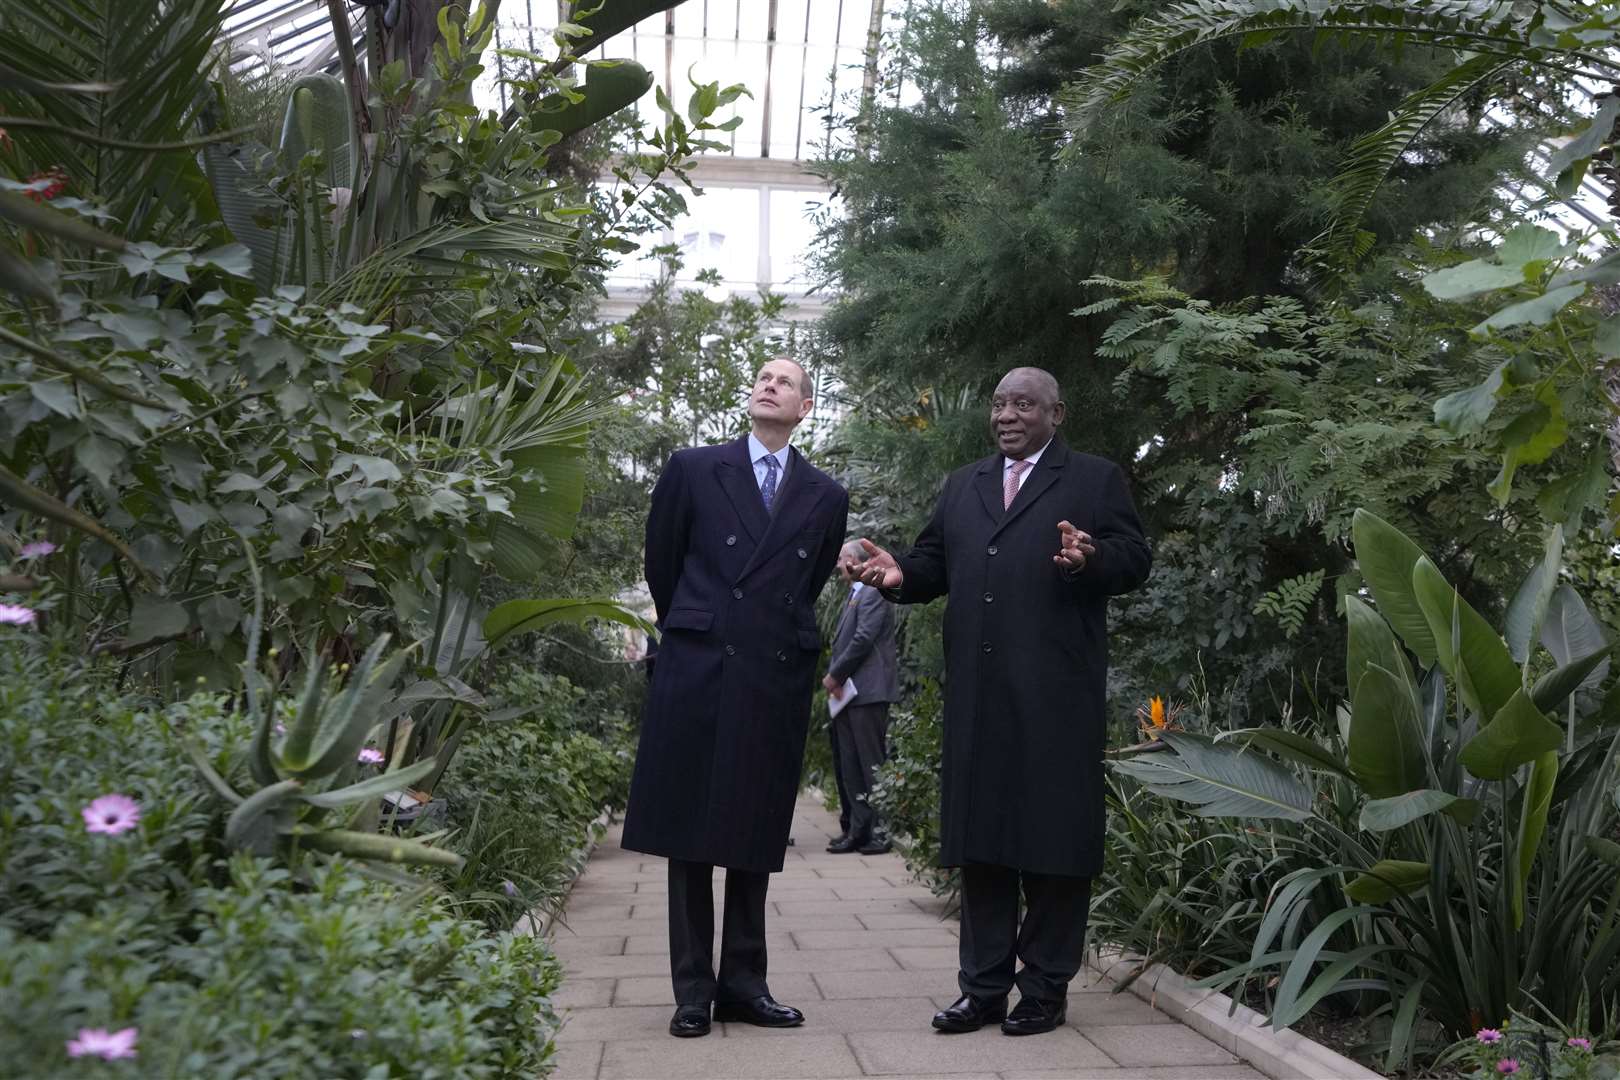 The president and the earl during a visit to the Royal Botanic Gardens, Kew (Kirsty Wigglesworth/PA)